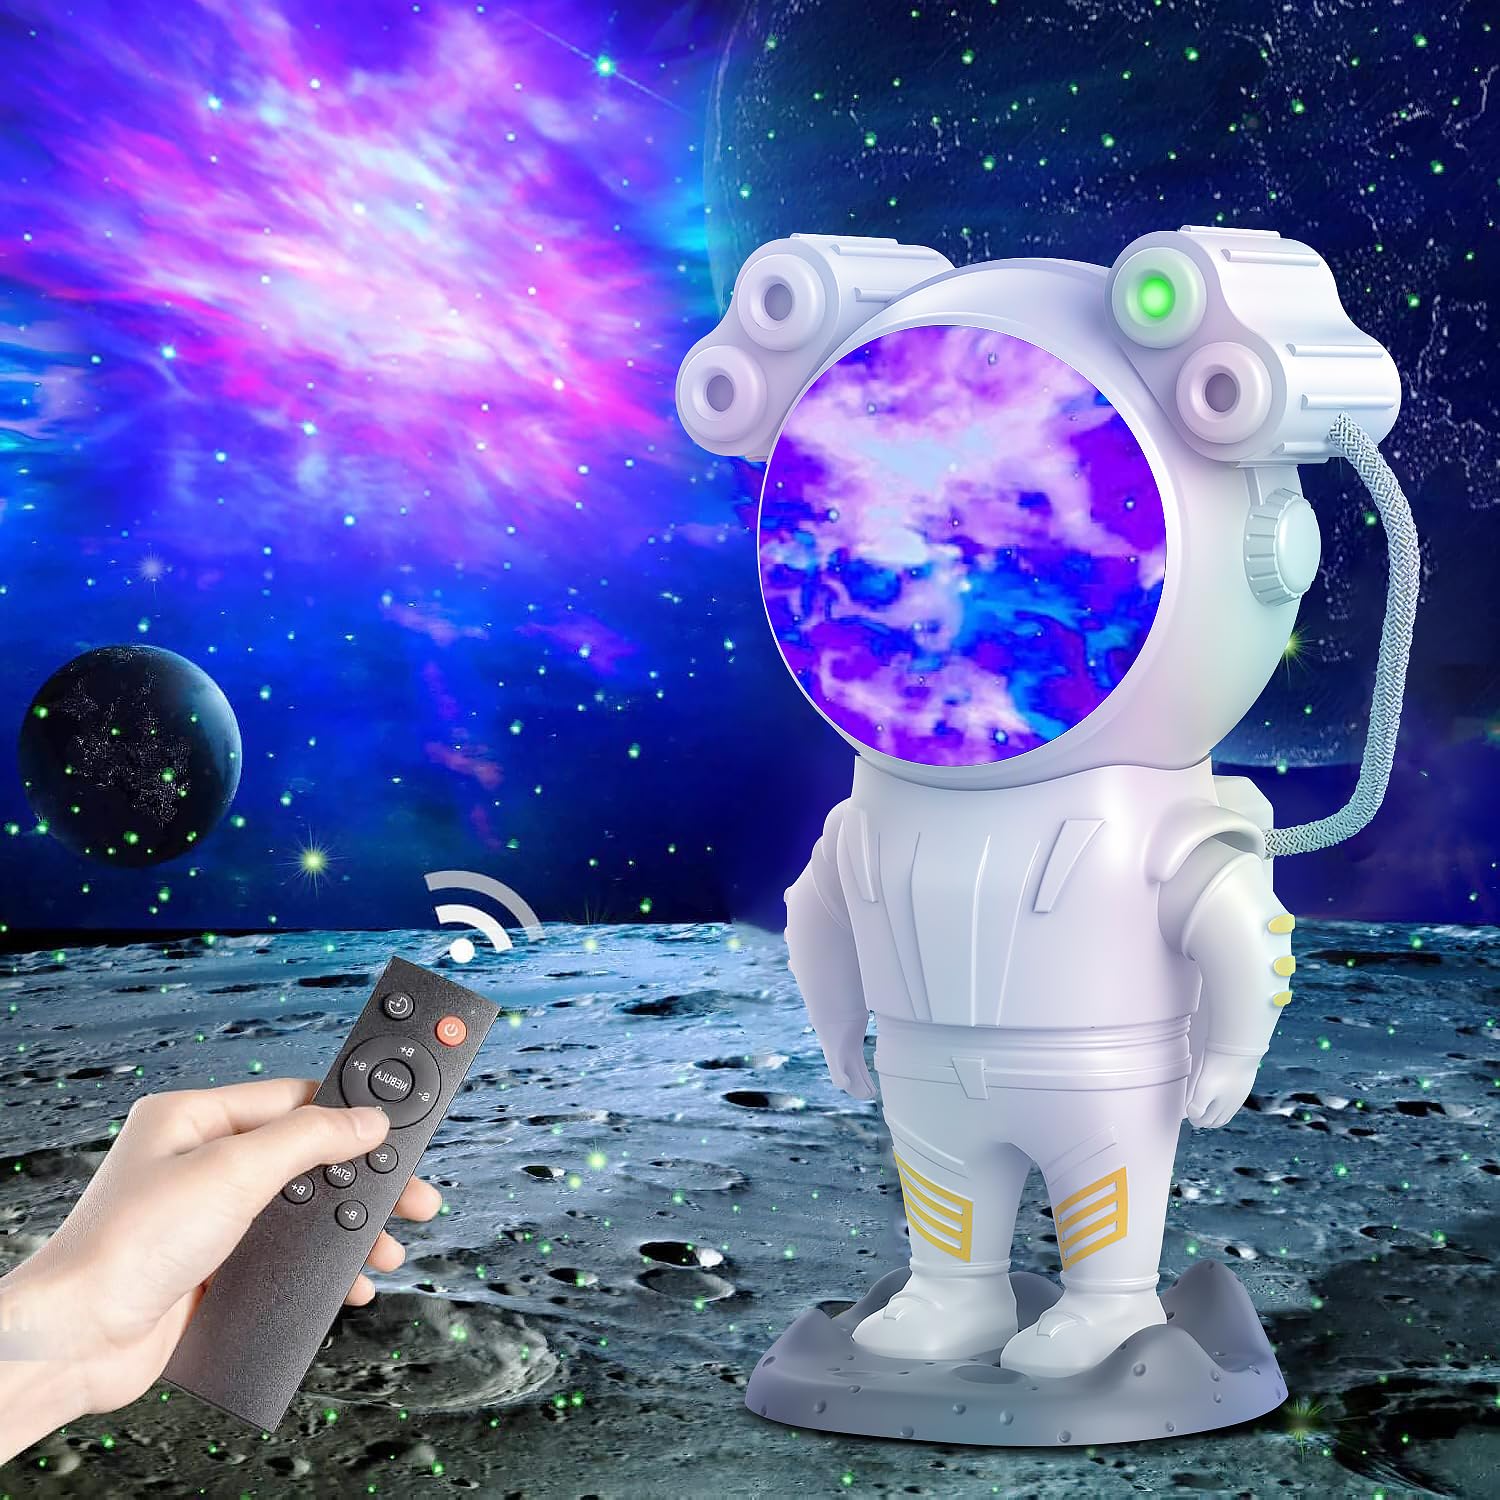 Astronaut Galaxy Star Projector Starry Night Light, Astronaut Light Projector with Nebula,Timer and Remote Control, Bedroom and Ceiling Projector, Best Gifts for Children and Adults